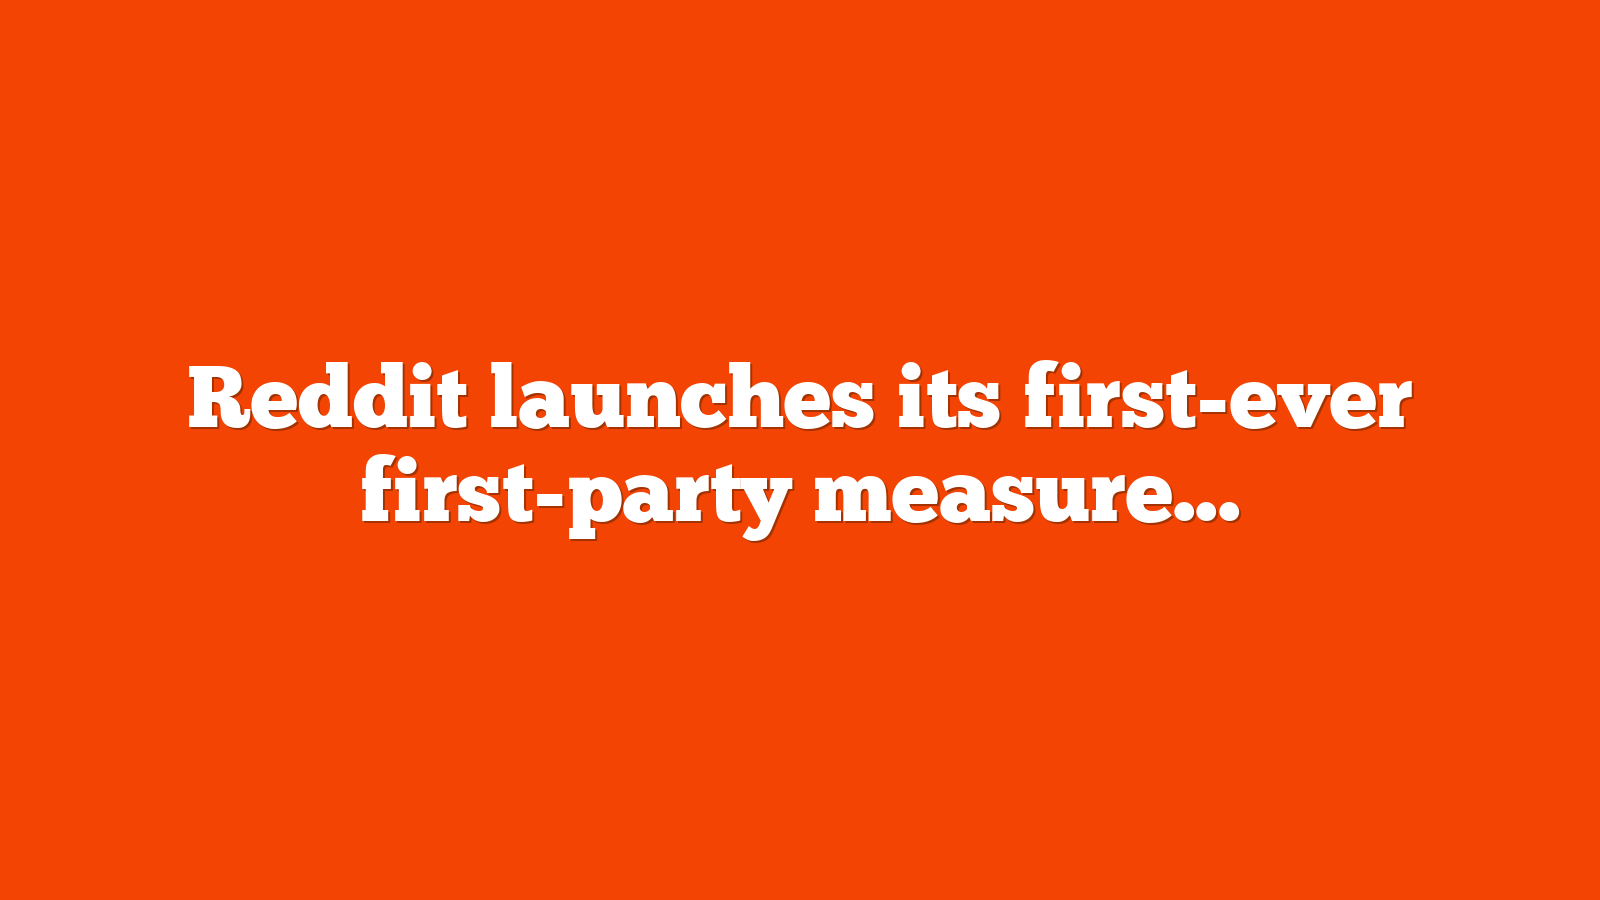 Reddit launches its first-ever first-party measurement tools